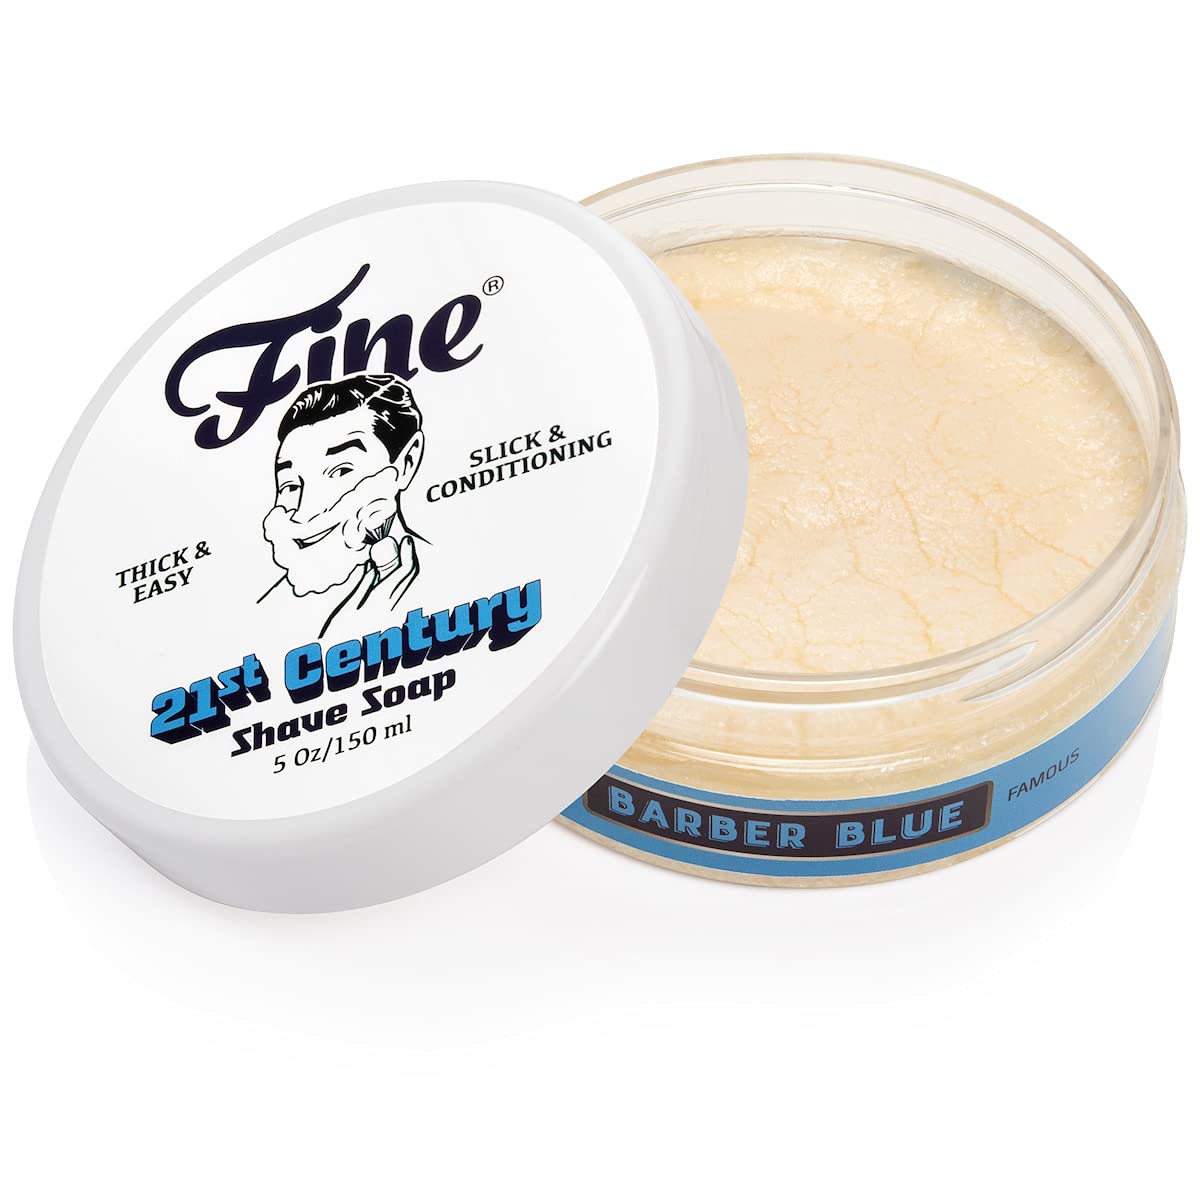 Mr. Fine 21C Men’s Shaving Soap, Builds Thick & Easy Lather, Protects From Razor Burn & Irritation, No Artificial Colors, Made In Italy, 5. (150), Barber Blue